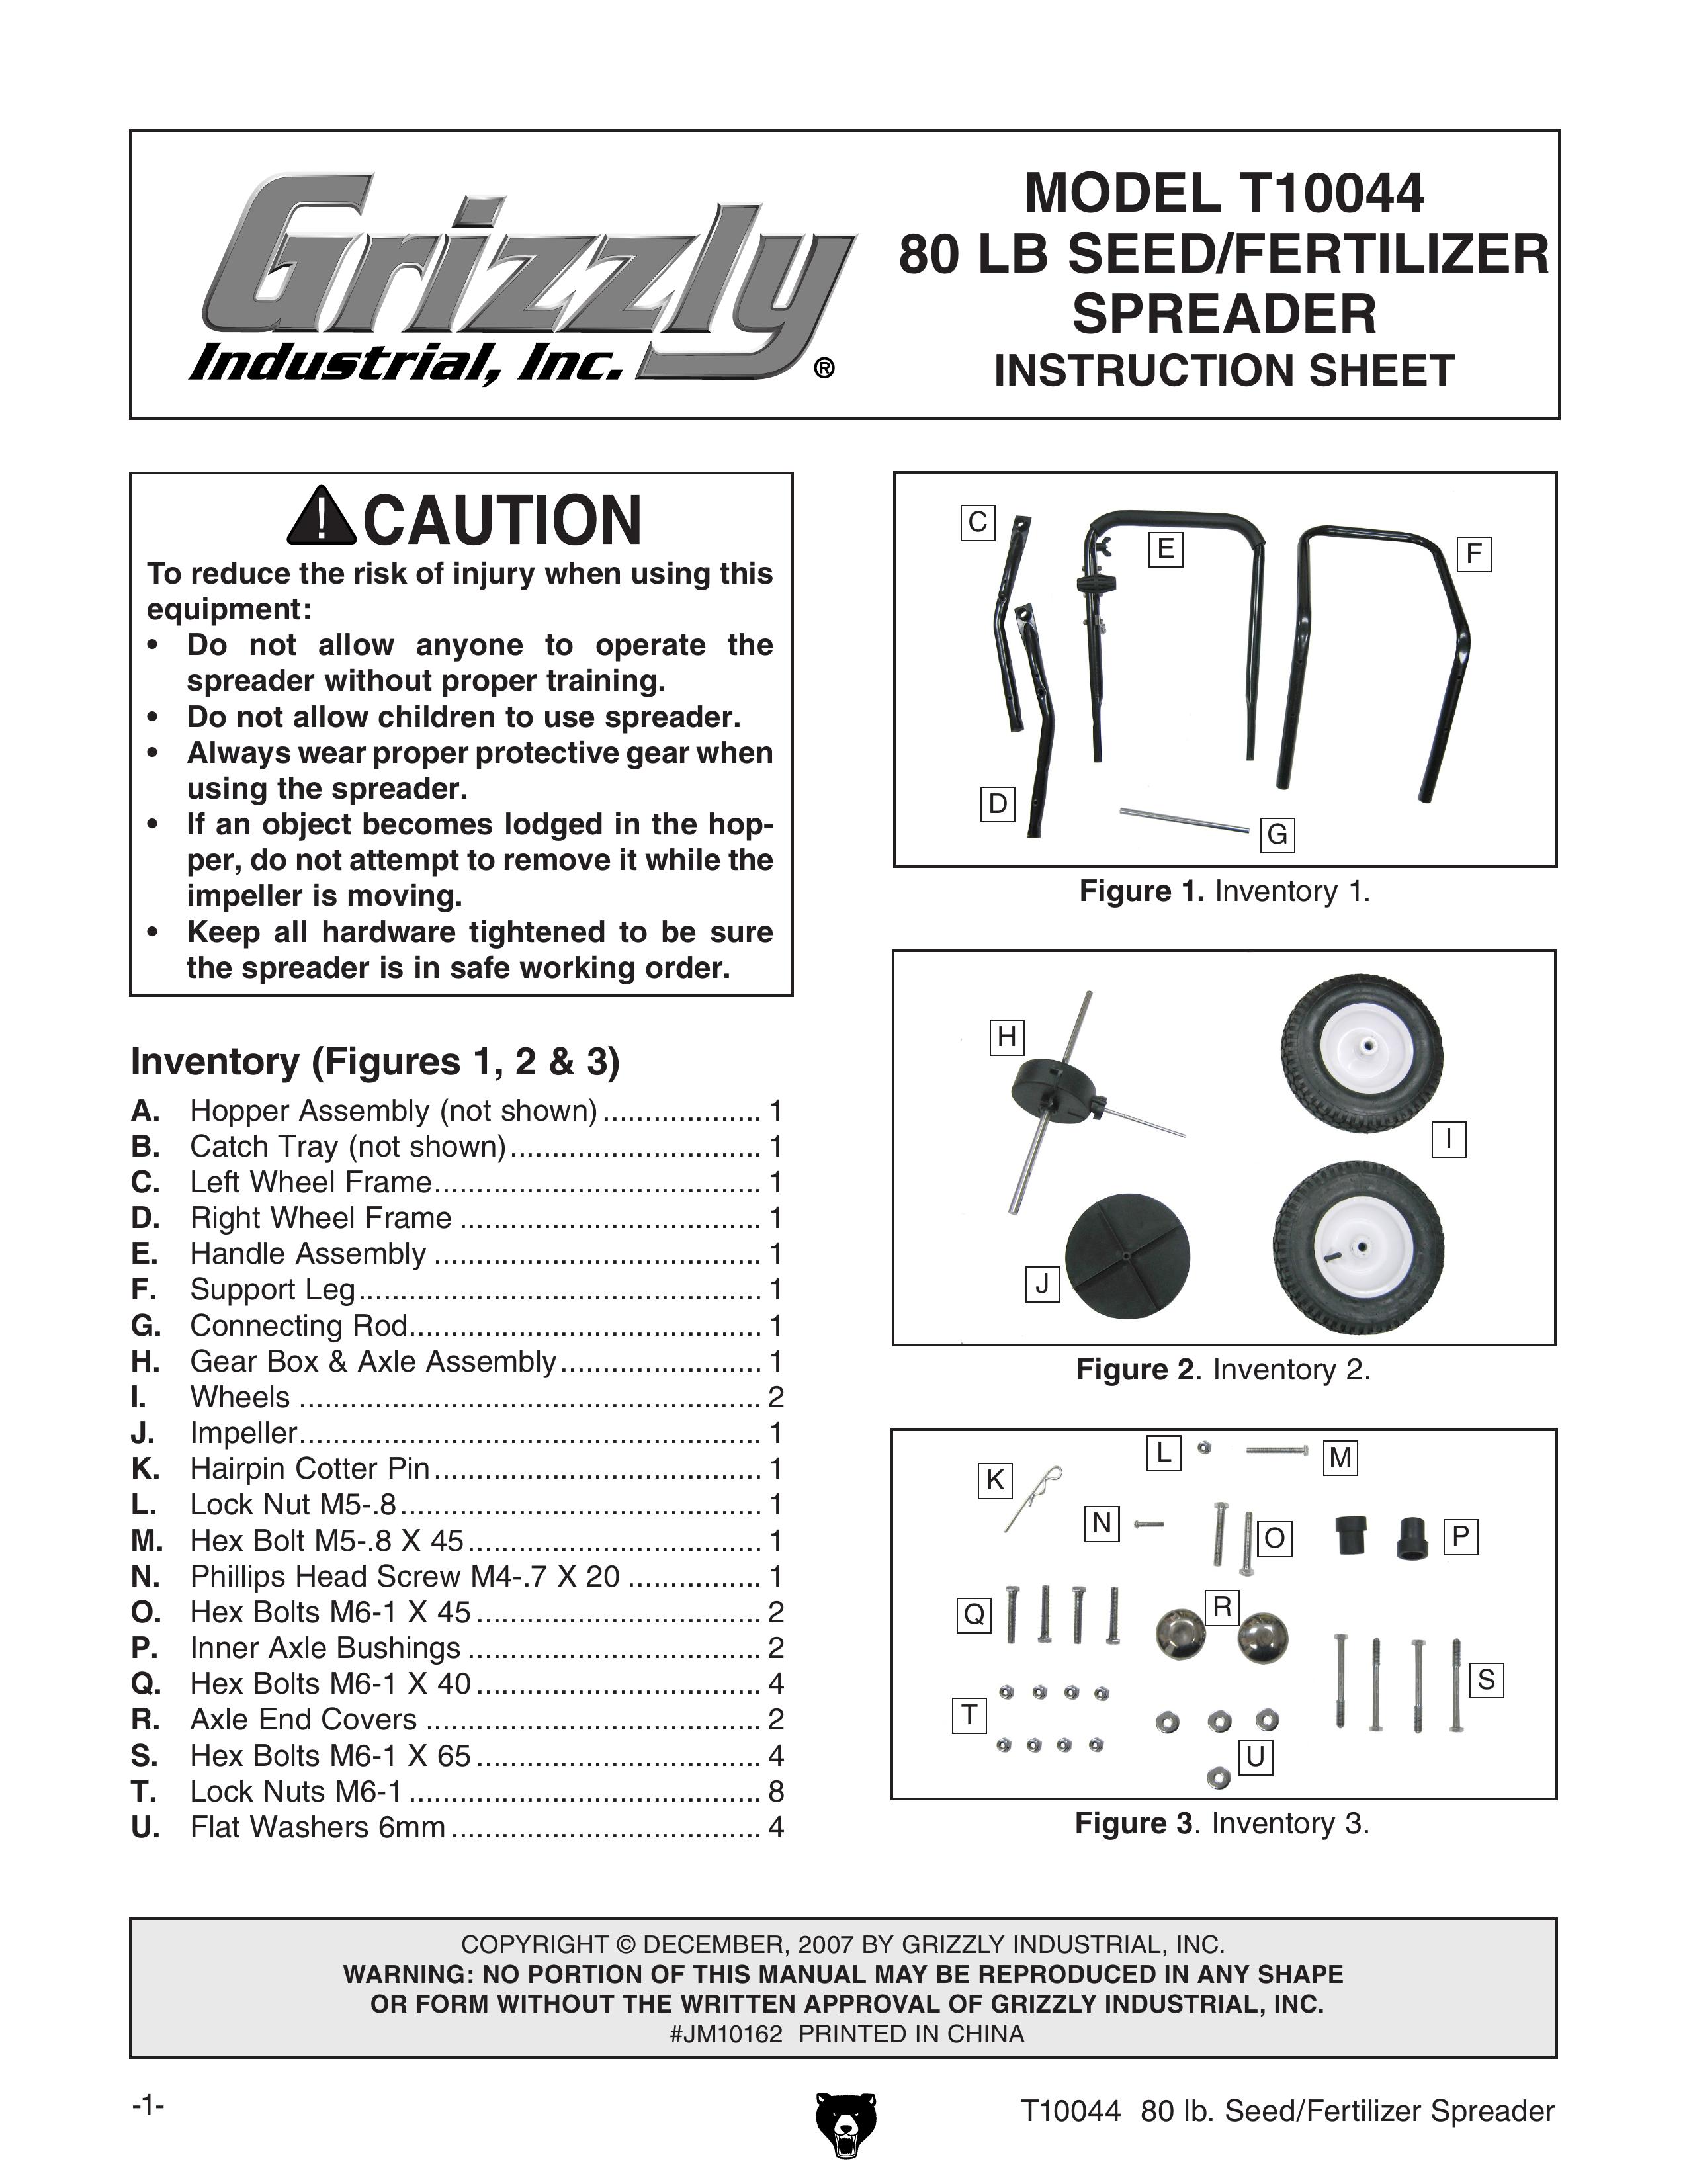 Grizzly T10044 Spreader User Manual